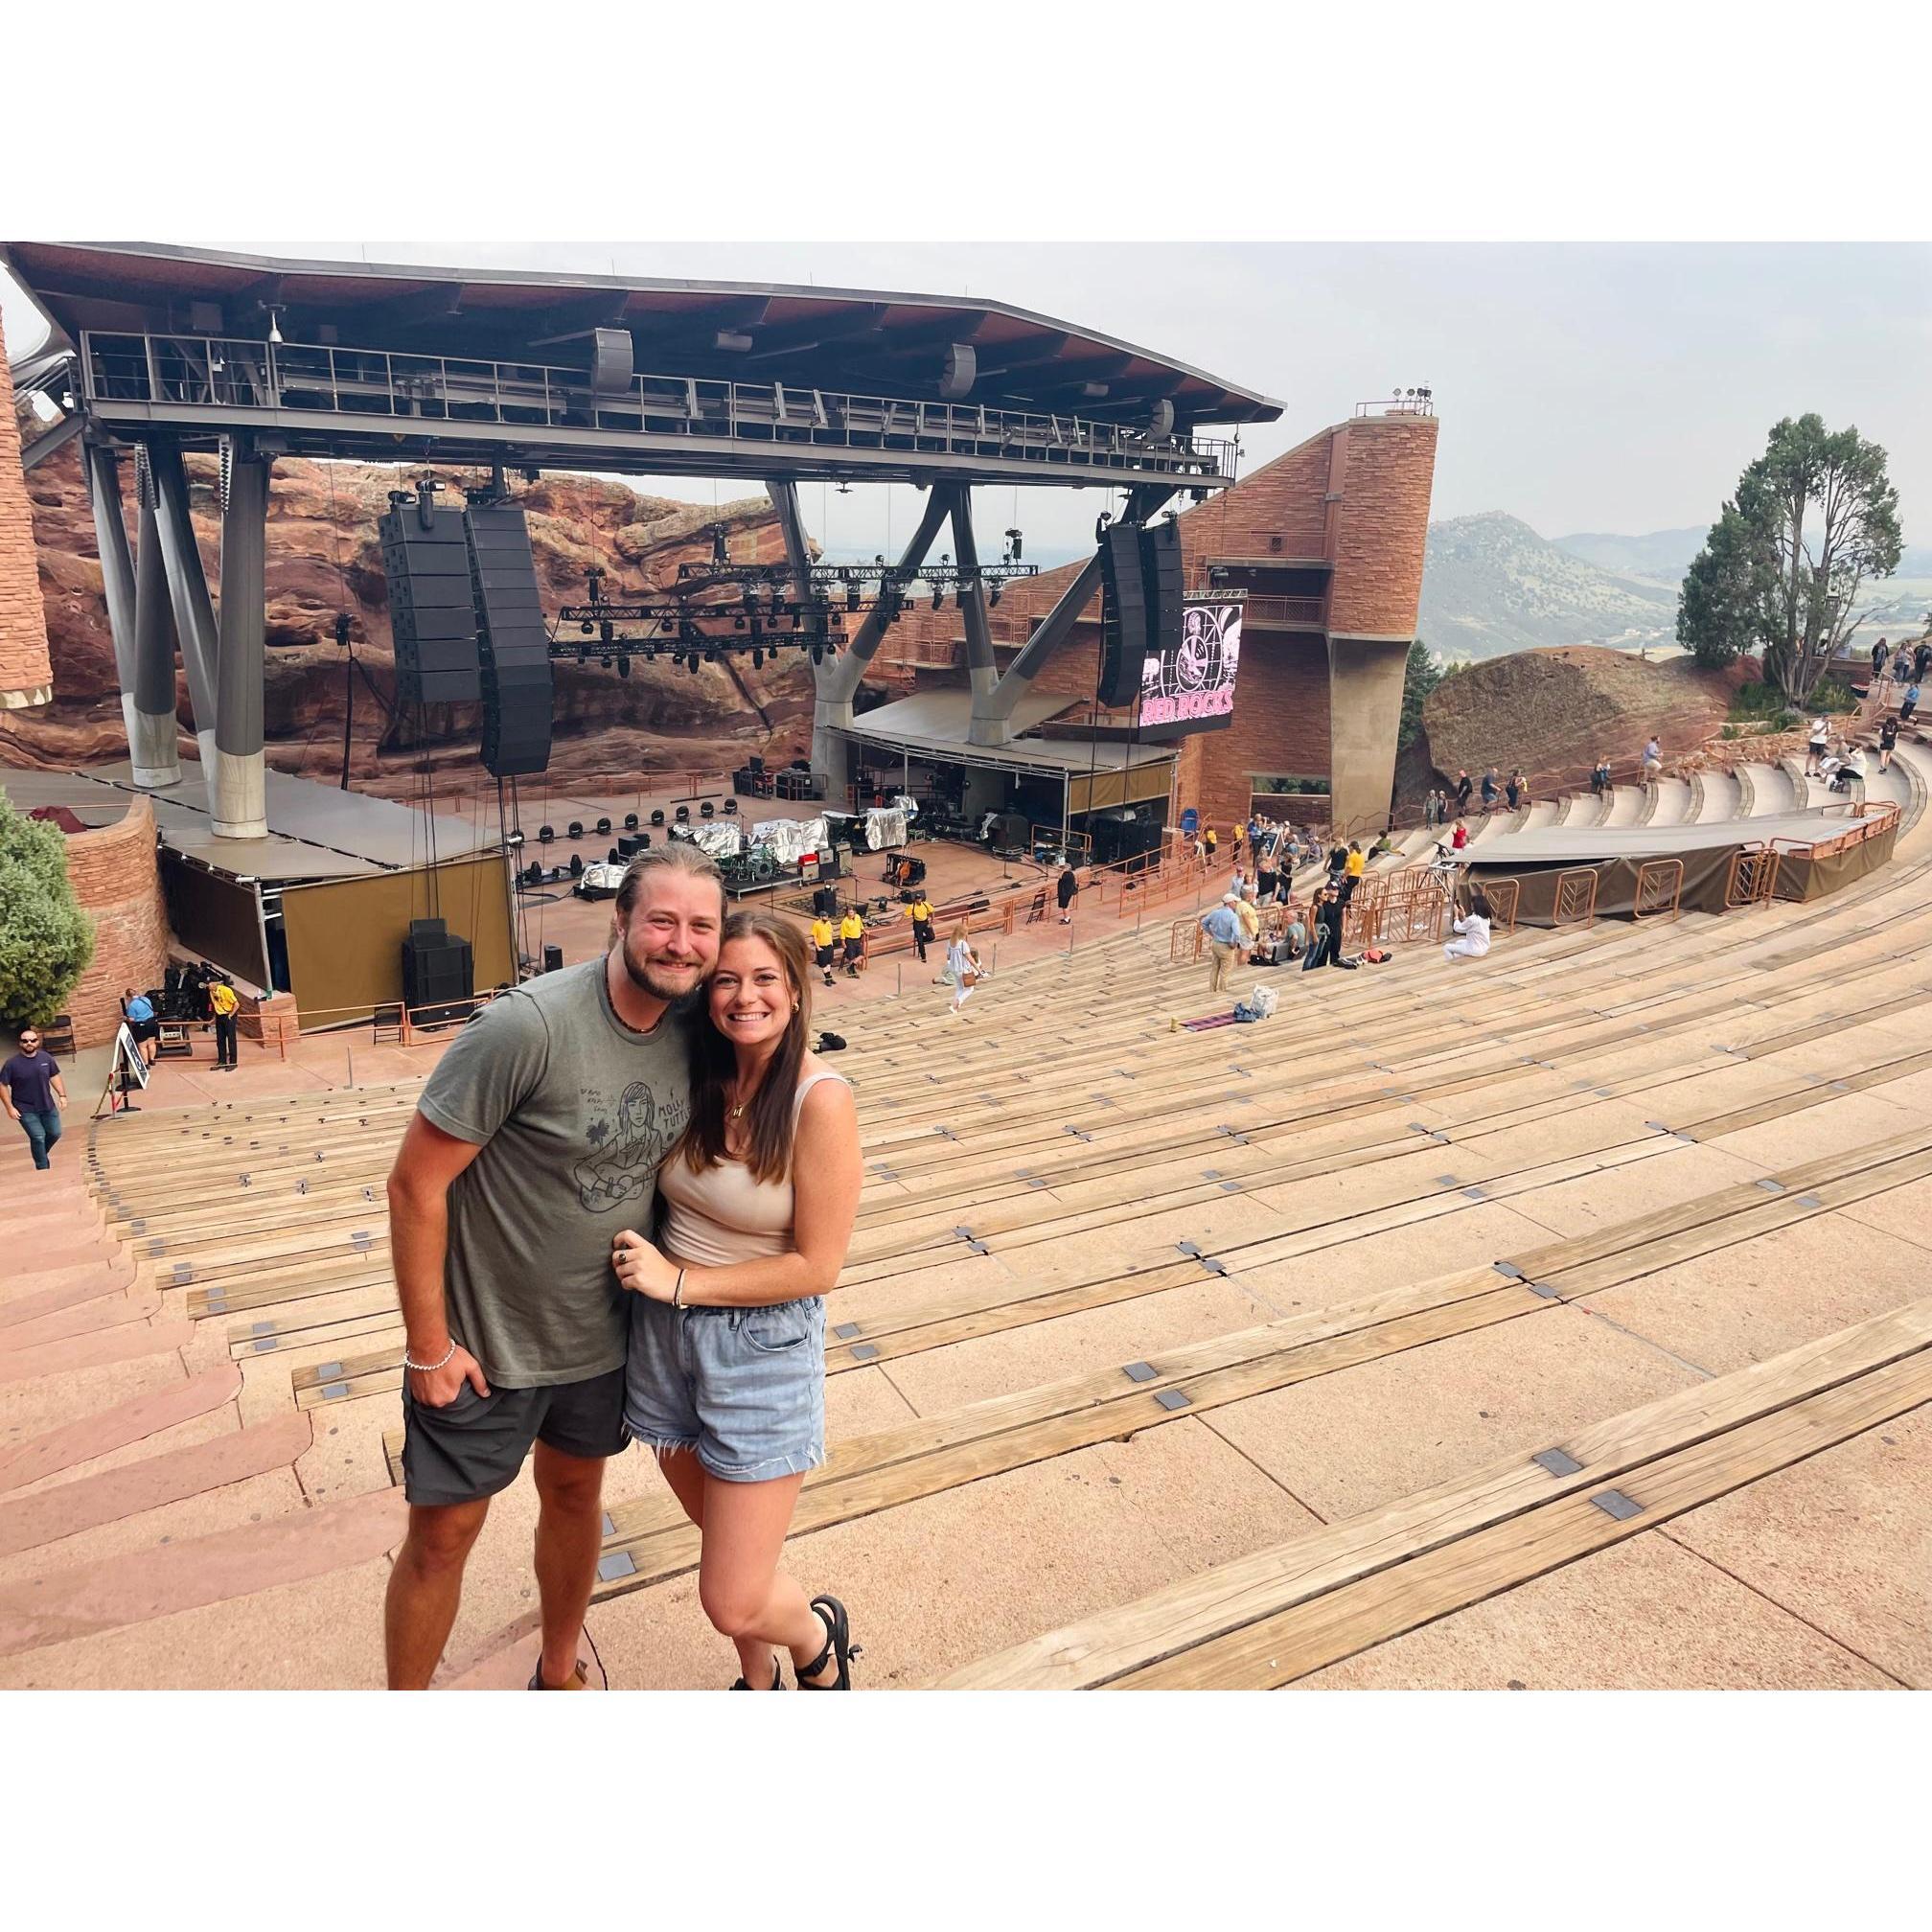 This was taken the day before we got engaged! We went to a Jason Isbell concert at Red Rocks Amphitheater in CO.